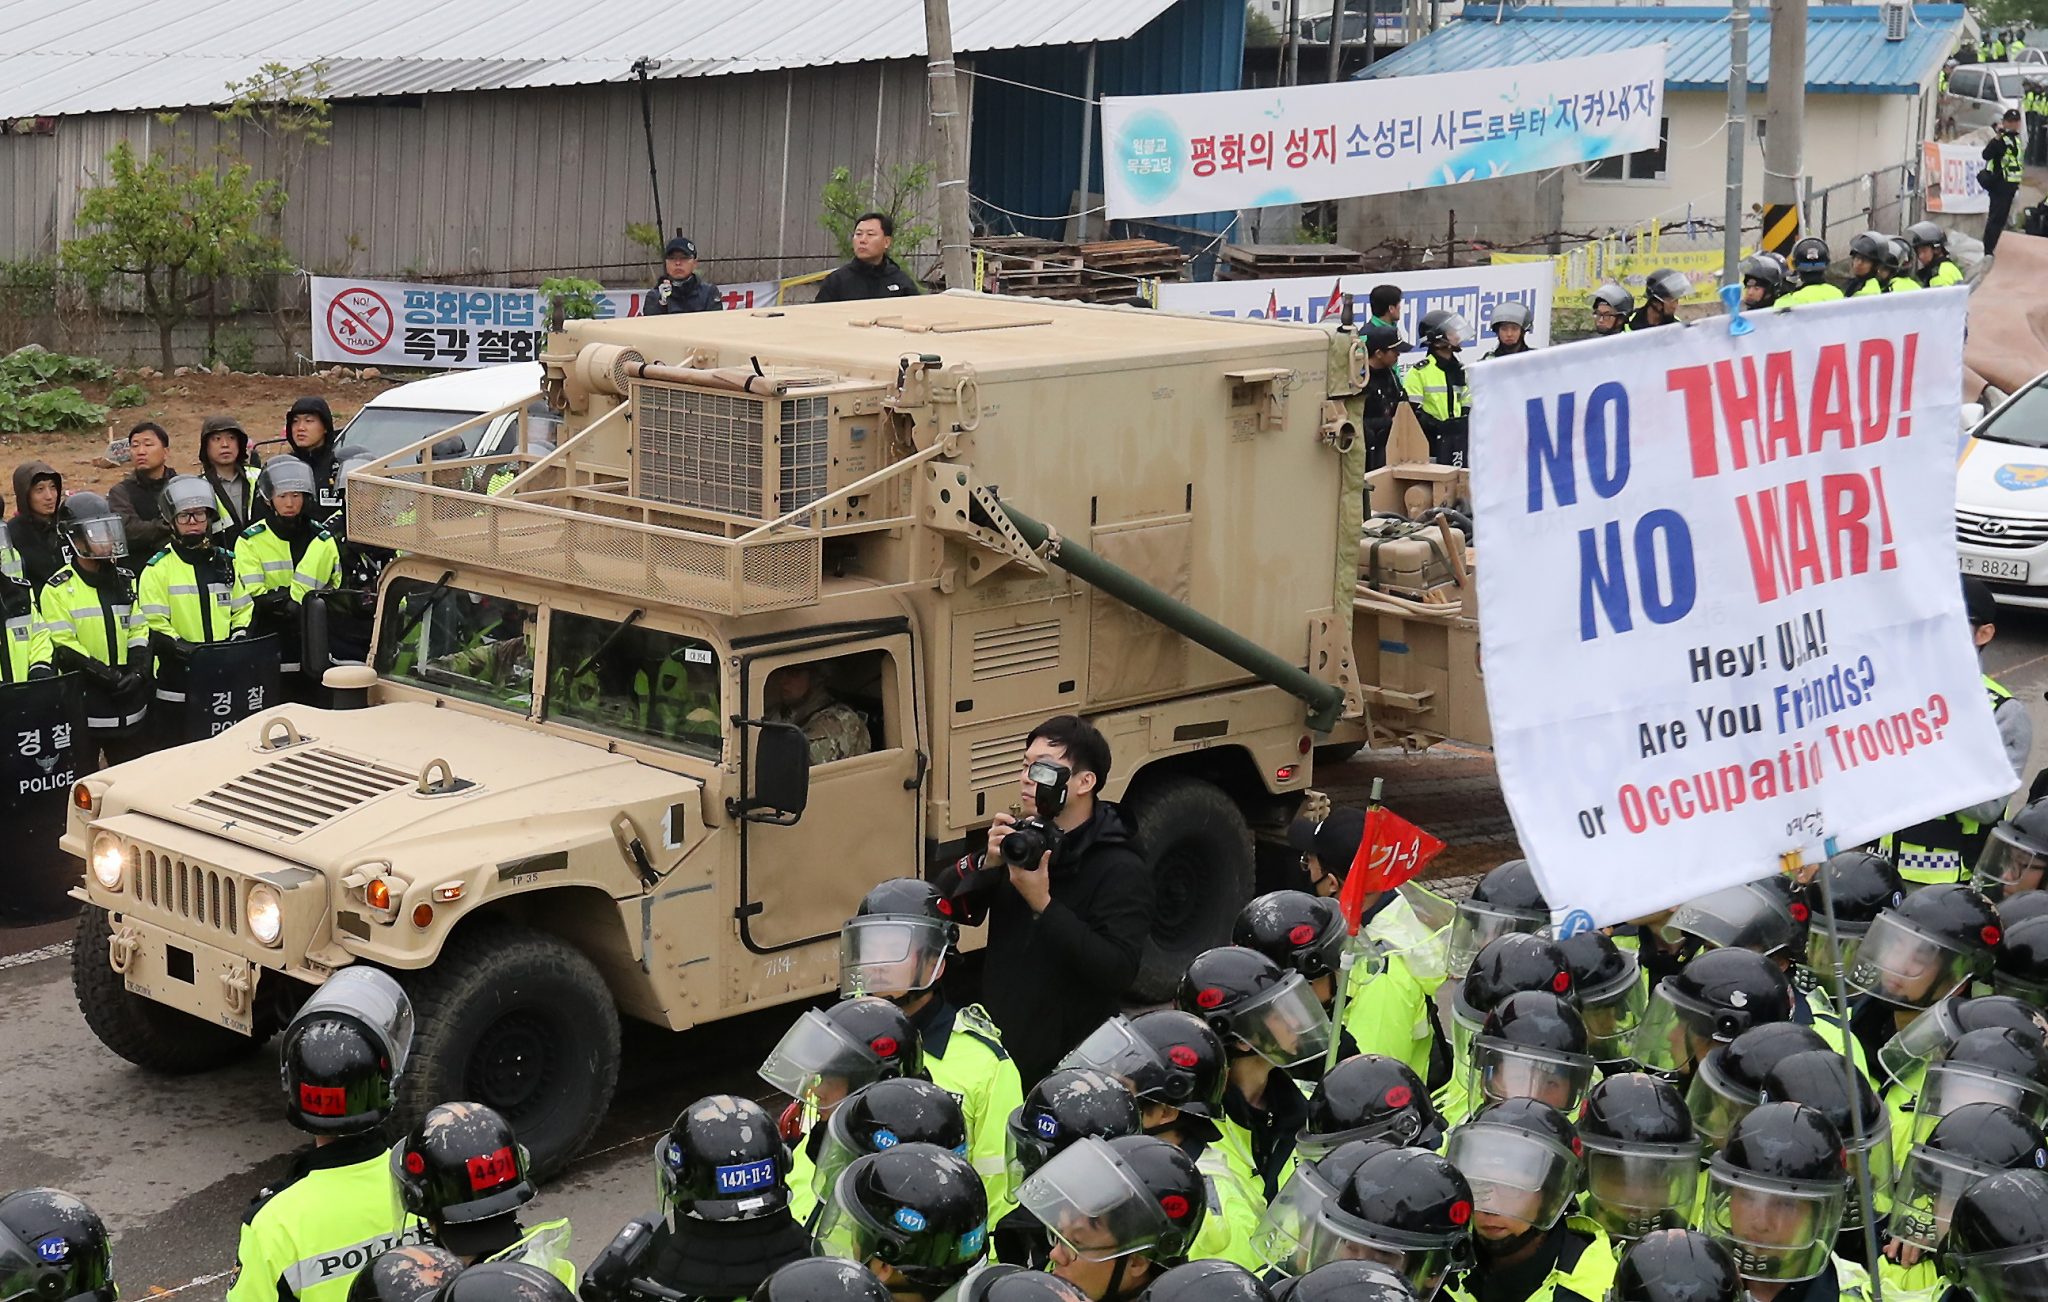 Protesters and police stand by as trailers carrying US THAAD missile defence equipment enter a deployment site in Seongju, early on April 26, 2017. Arrival of the six trailers at the golf course location sparked clashes between locals and police, the agency said. / AFP PHOTO / YONHAP / YONHAP / REPUBLIC OF KOREA OUT  NO ARCHIVES  RESTRICTED TO SUBSCRIPTION USE